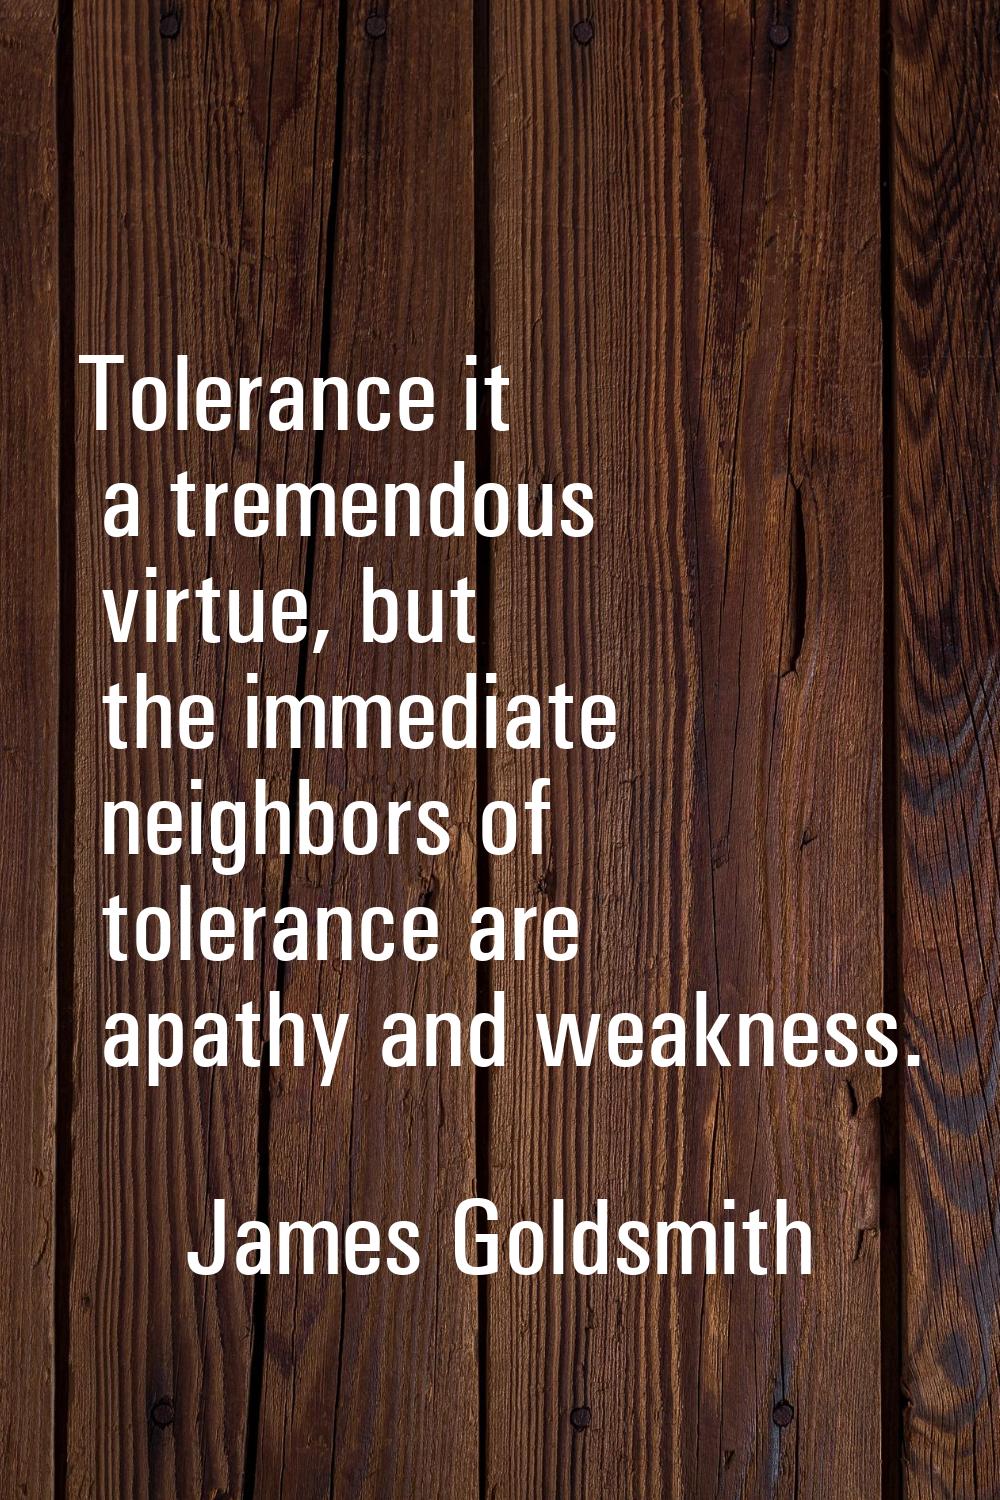 Tolerance it a tremendous virtue, but the immediate neighbors of tolerance are apathy and weakness.